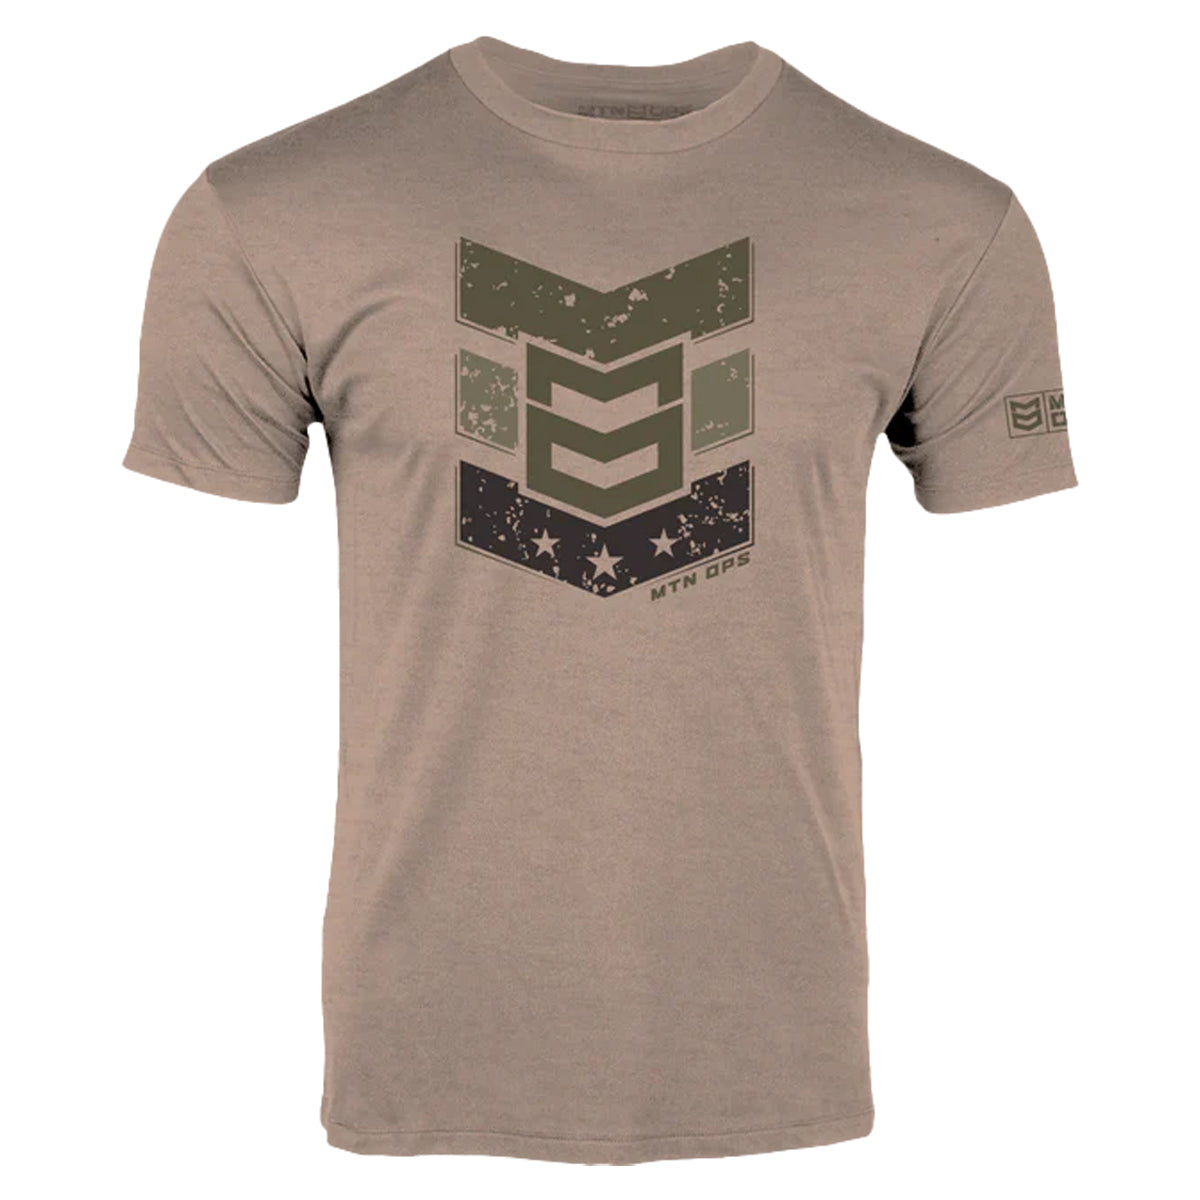 MTN OPS Griff Tee in Warm Gray by GOHUNT | Mtn Ops - GOHUNT Shop